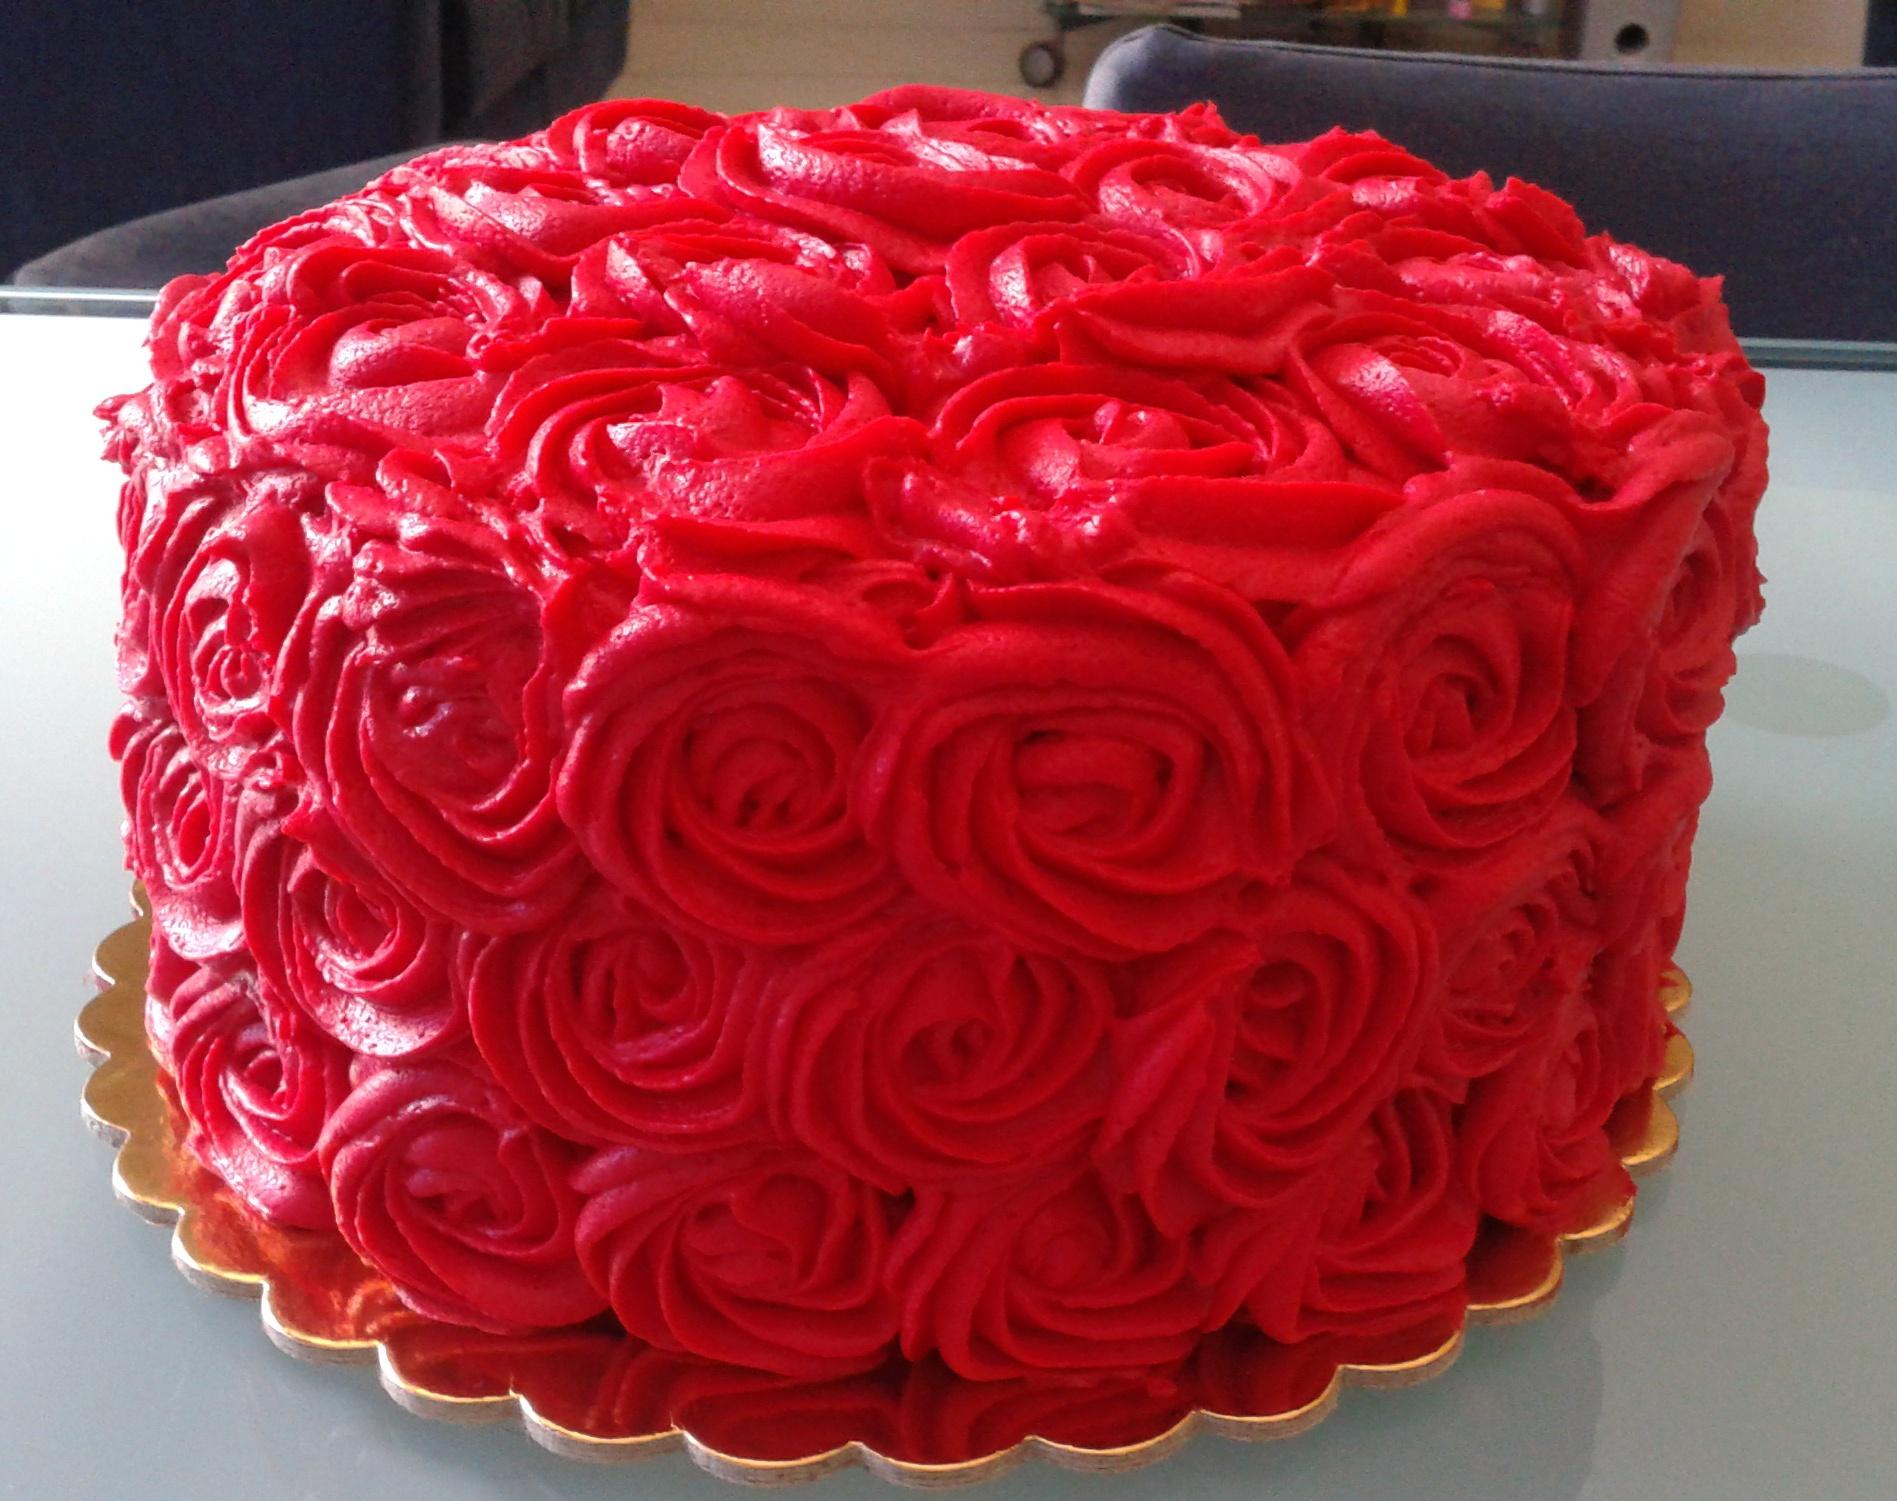 TORTA CON FROSTING ROSSO